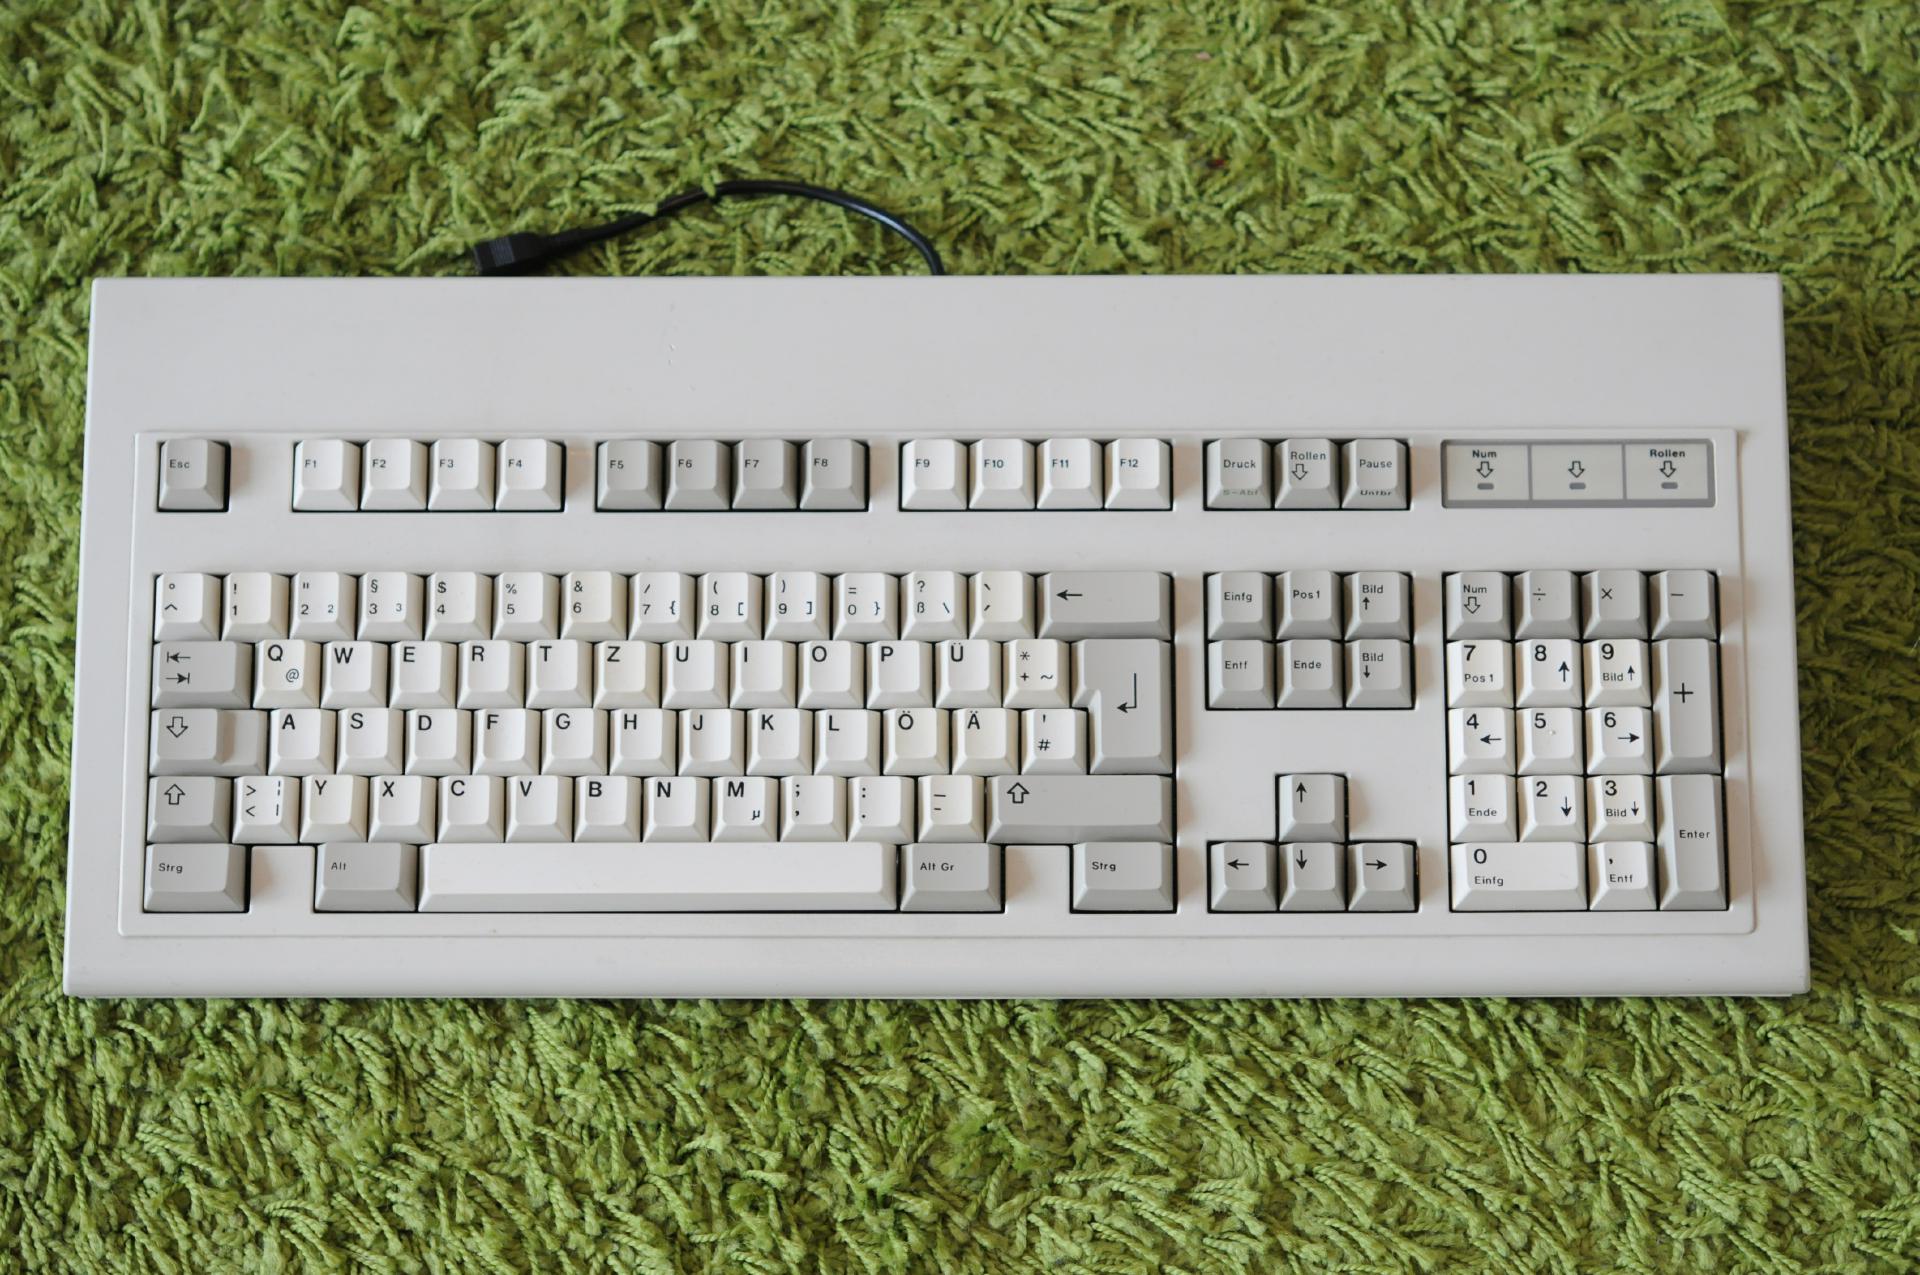 G80-1000 overview